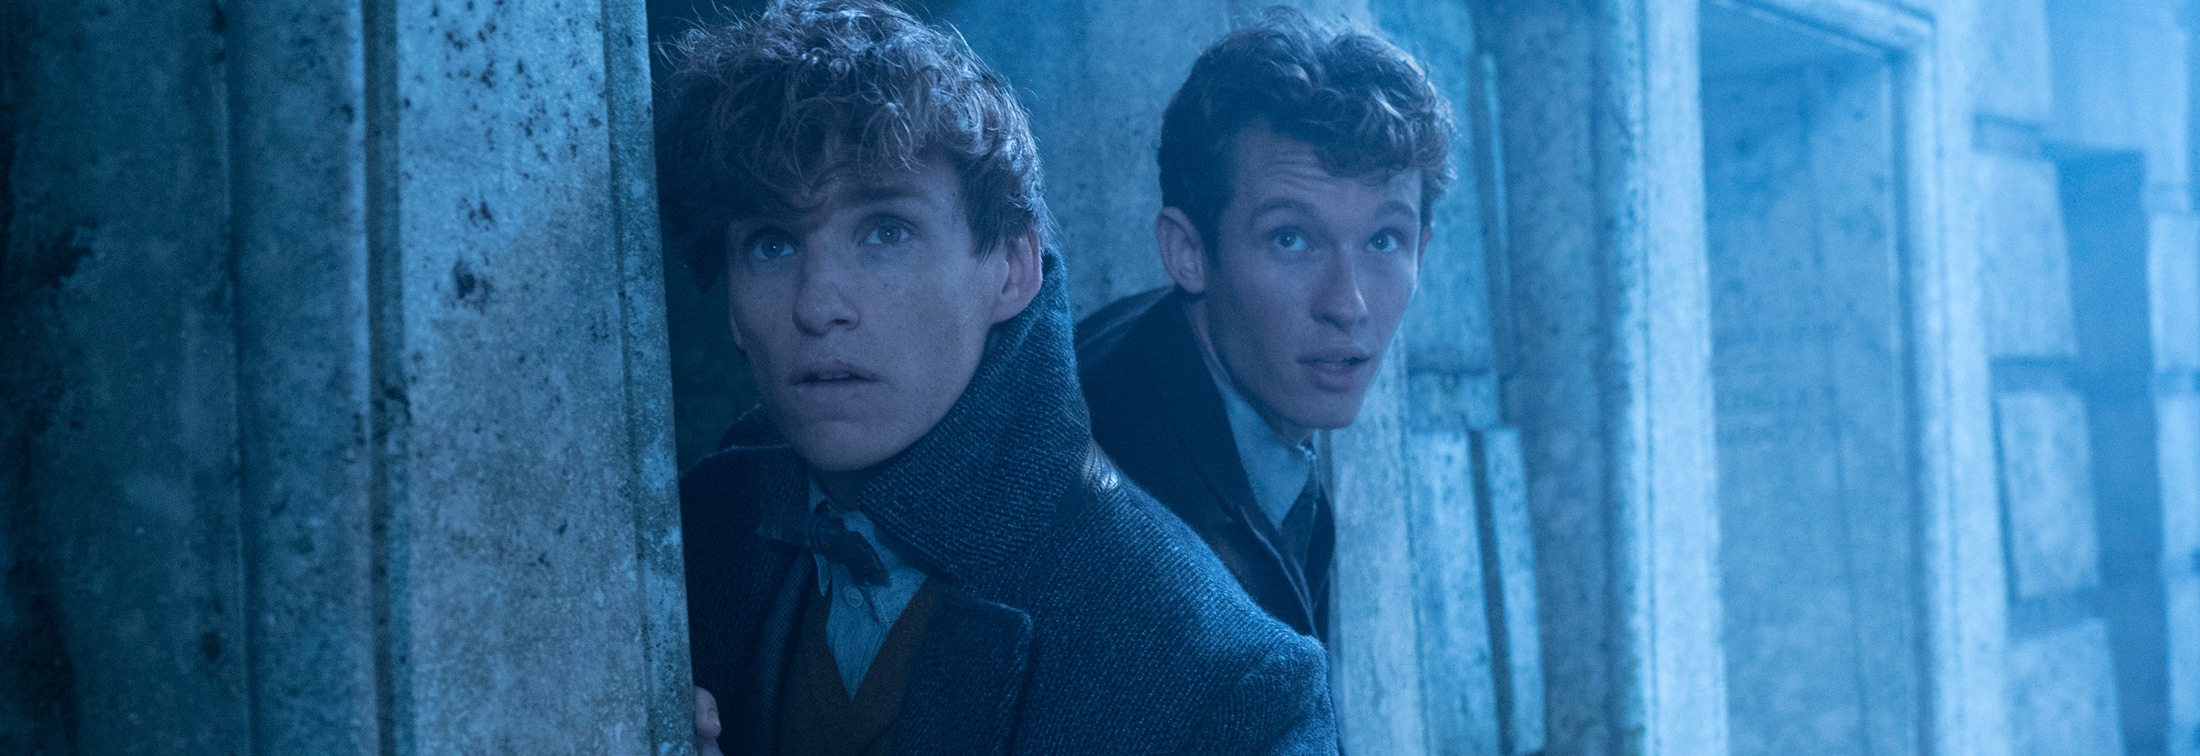 Fantastic Beasts: The Crimes of Grindelwald - A fantastic failure for the Potterverse